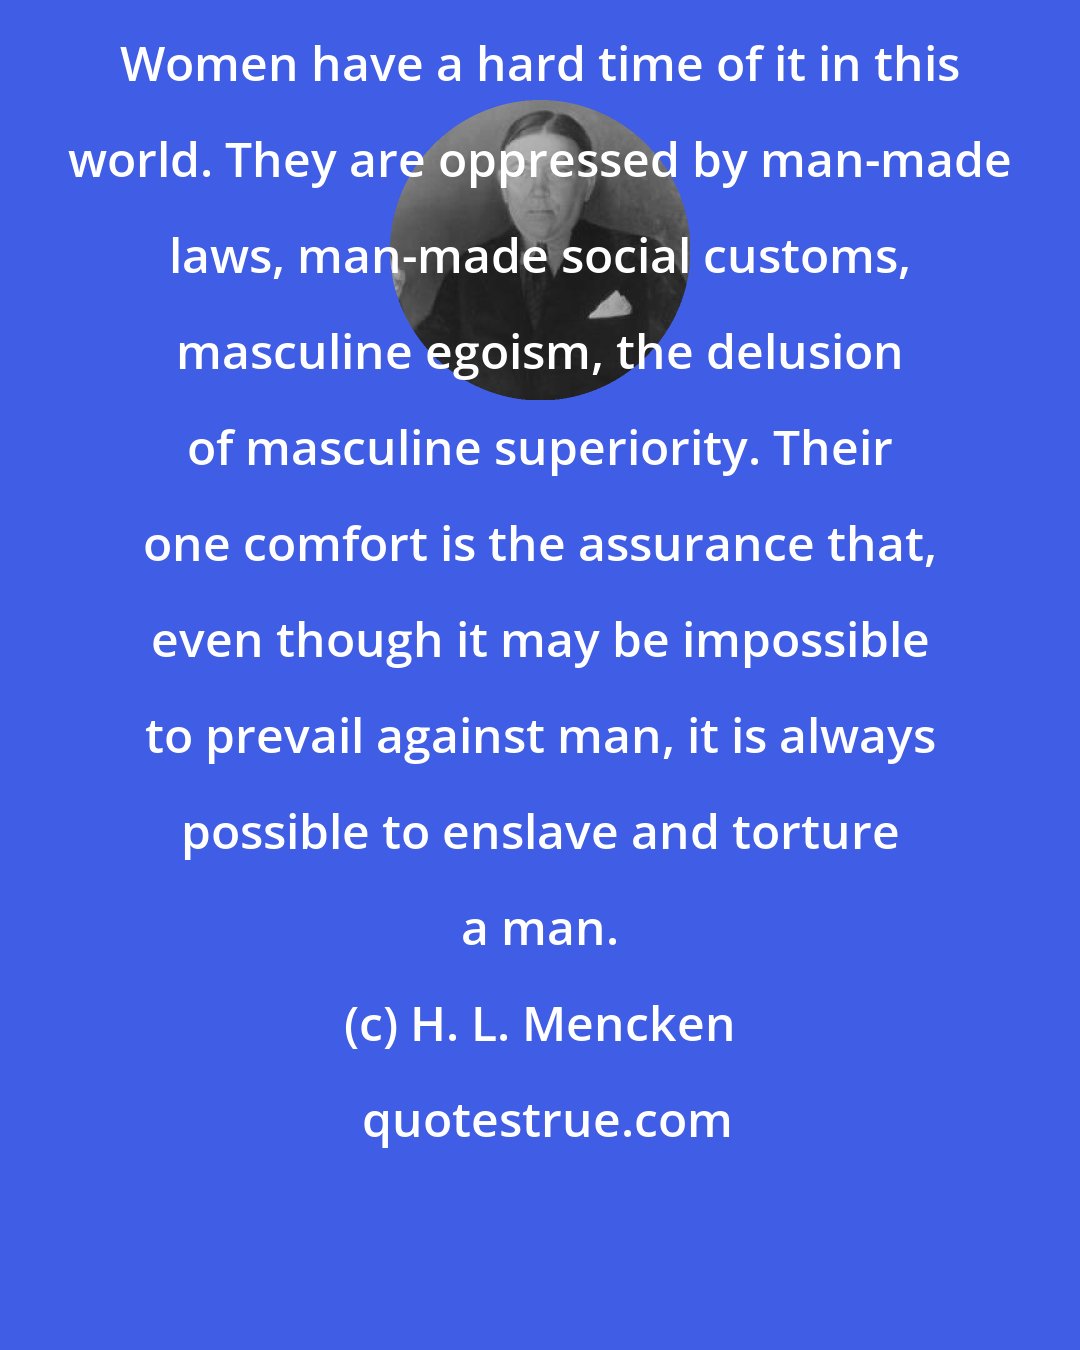 H. L. Mencken: Women have a hard time of it in this world. They are oppressed by man-made laws, man-made social customs, masculine egoism, the delusion of masculine superiority. Their one comfort is the assurance that, even though it may be impossible to prevail against man, it is always possible to enslave and torture a man.